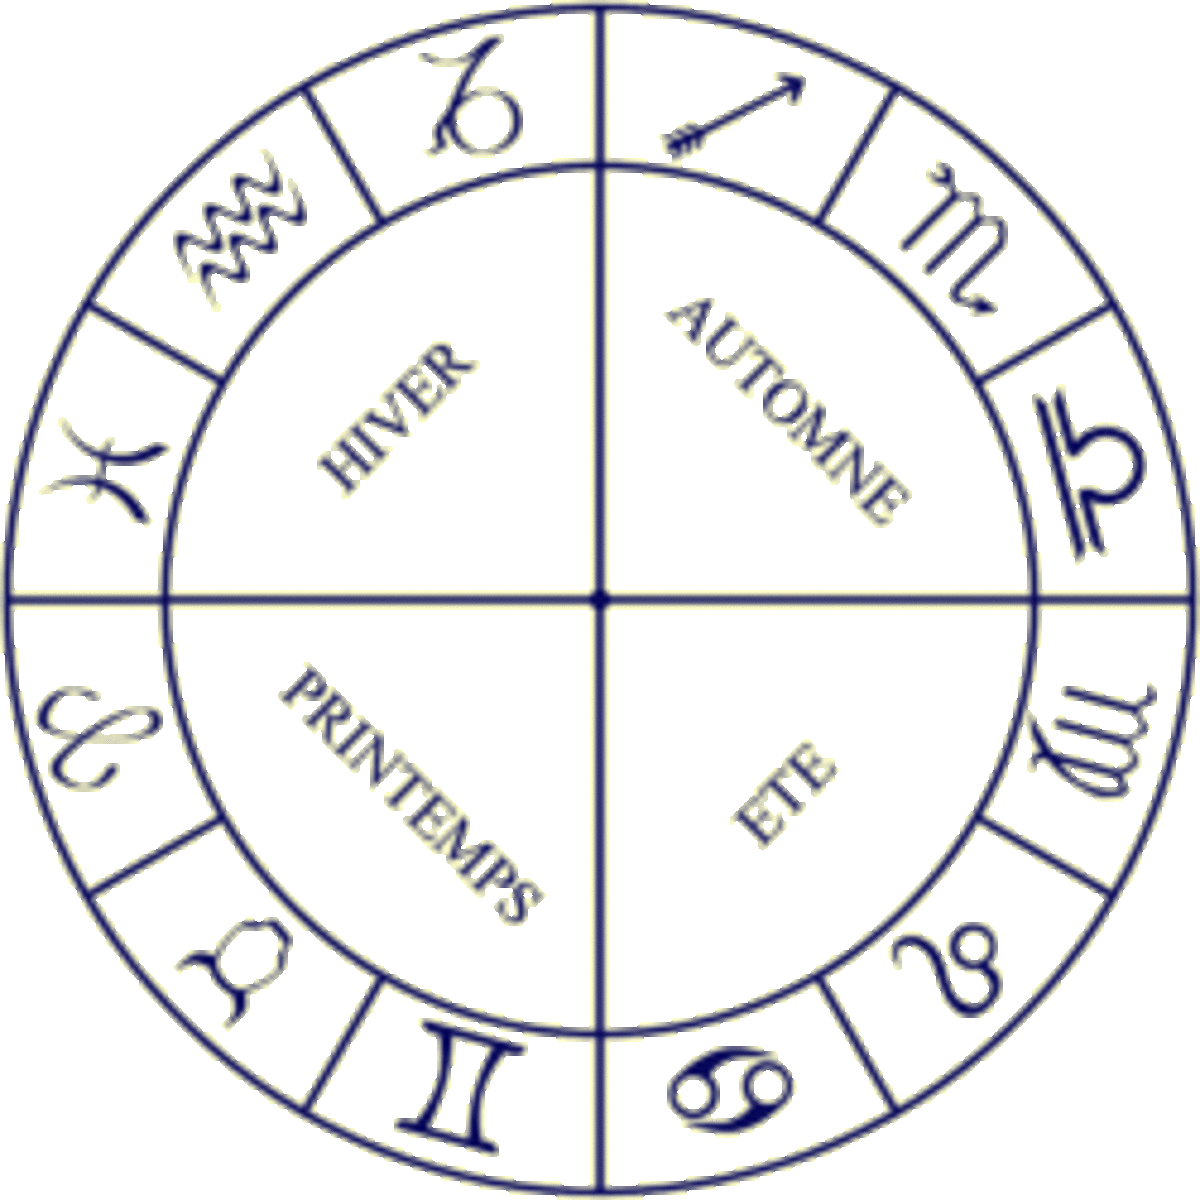 new and old zodiac dates